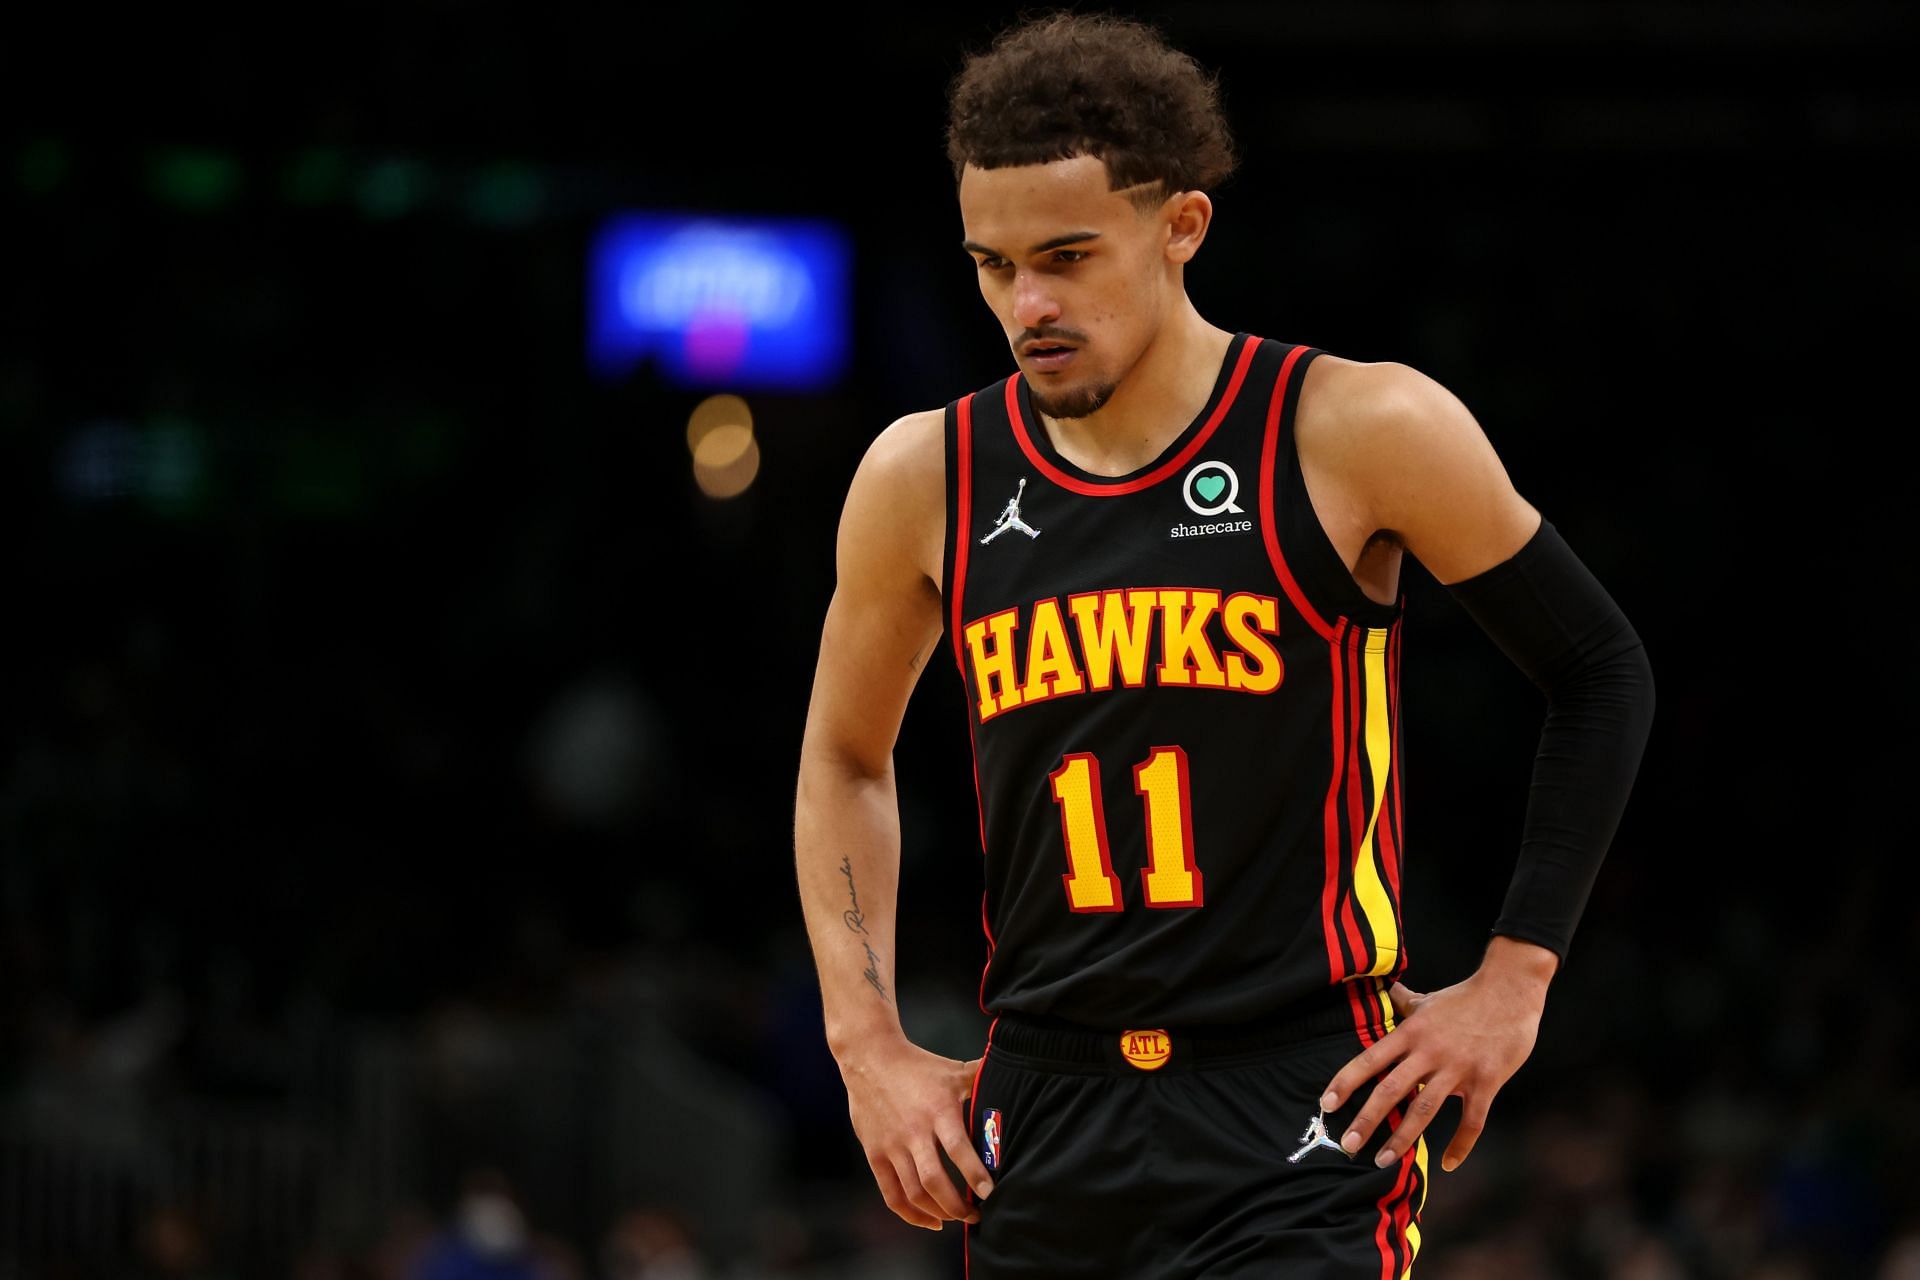 Atlanta Hawks star guard Trae Young in a game against the Boston Celtics